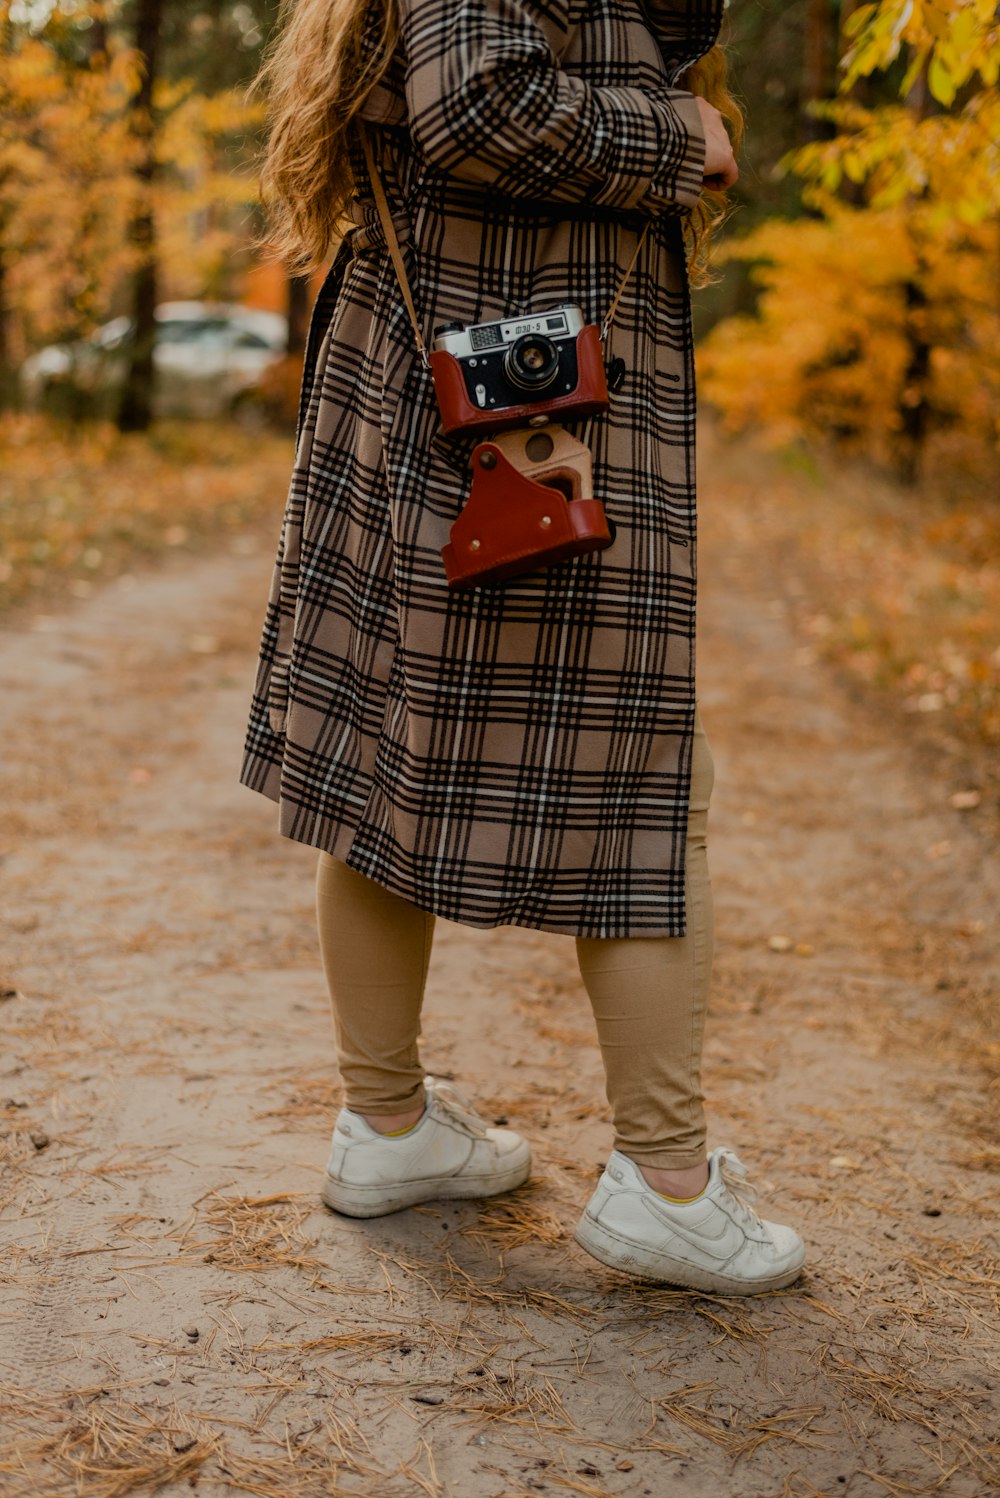 a woman standing on a dirt road holding a camera